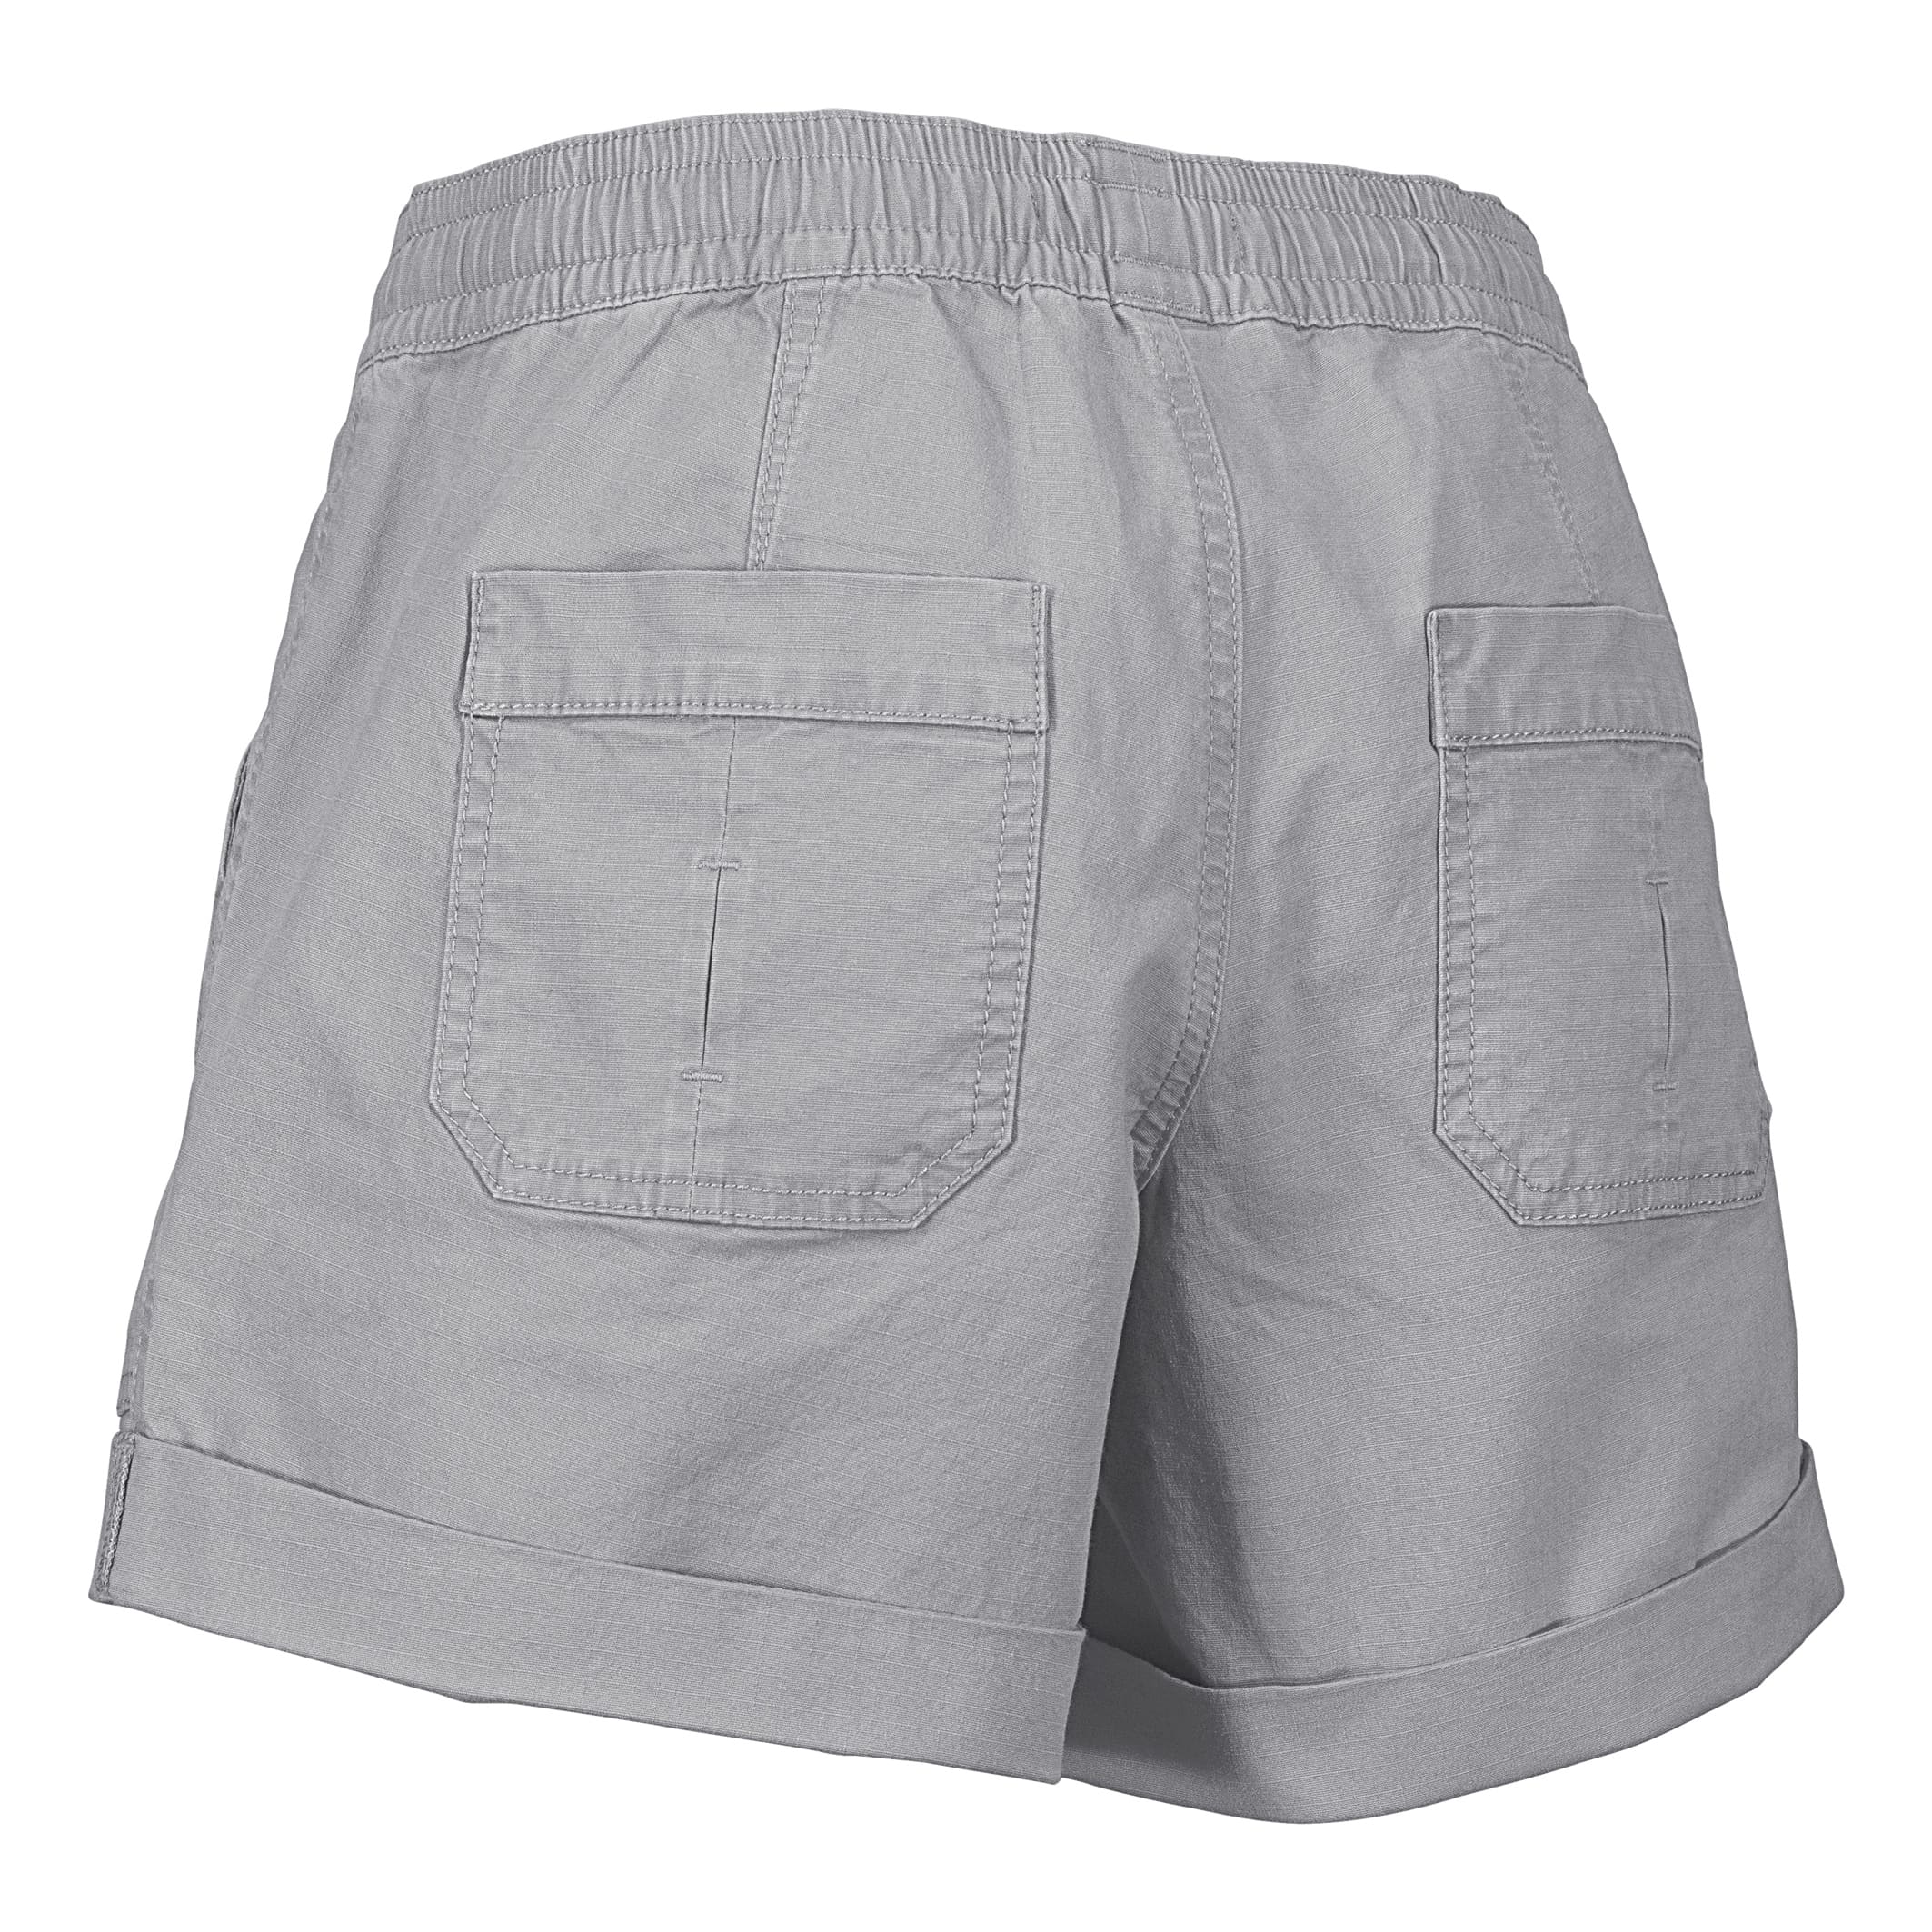 Natural Reflections® Women’s Adventurer Ripstop Shorts - Frost Grey - back